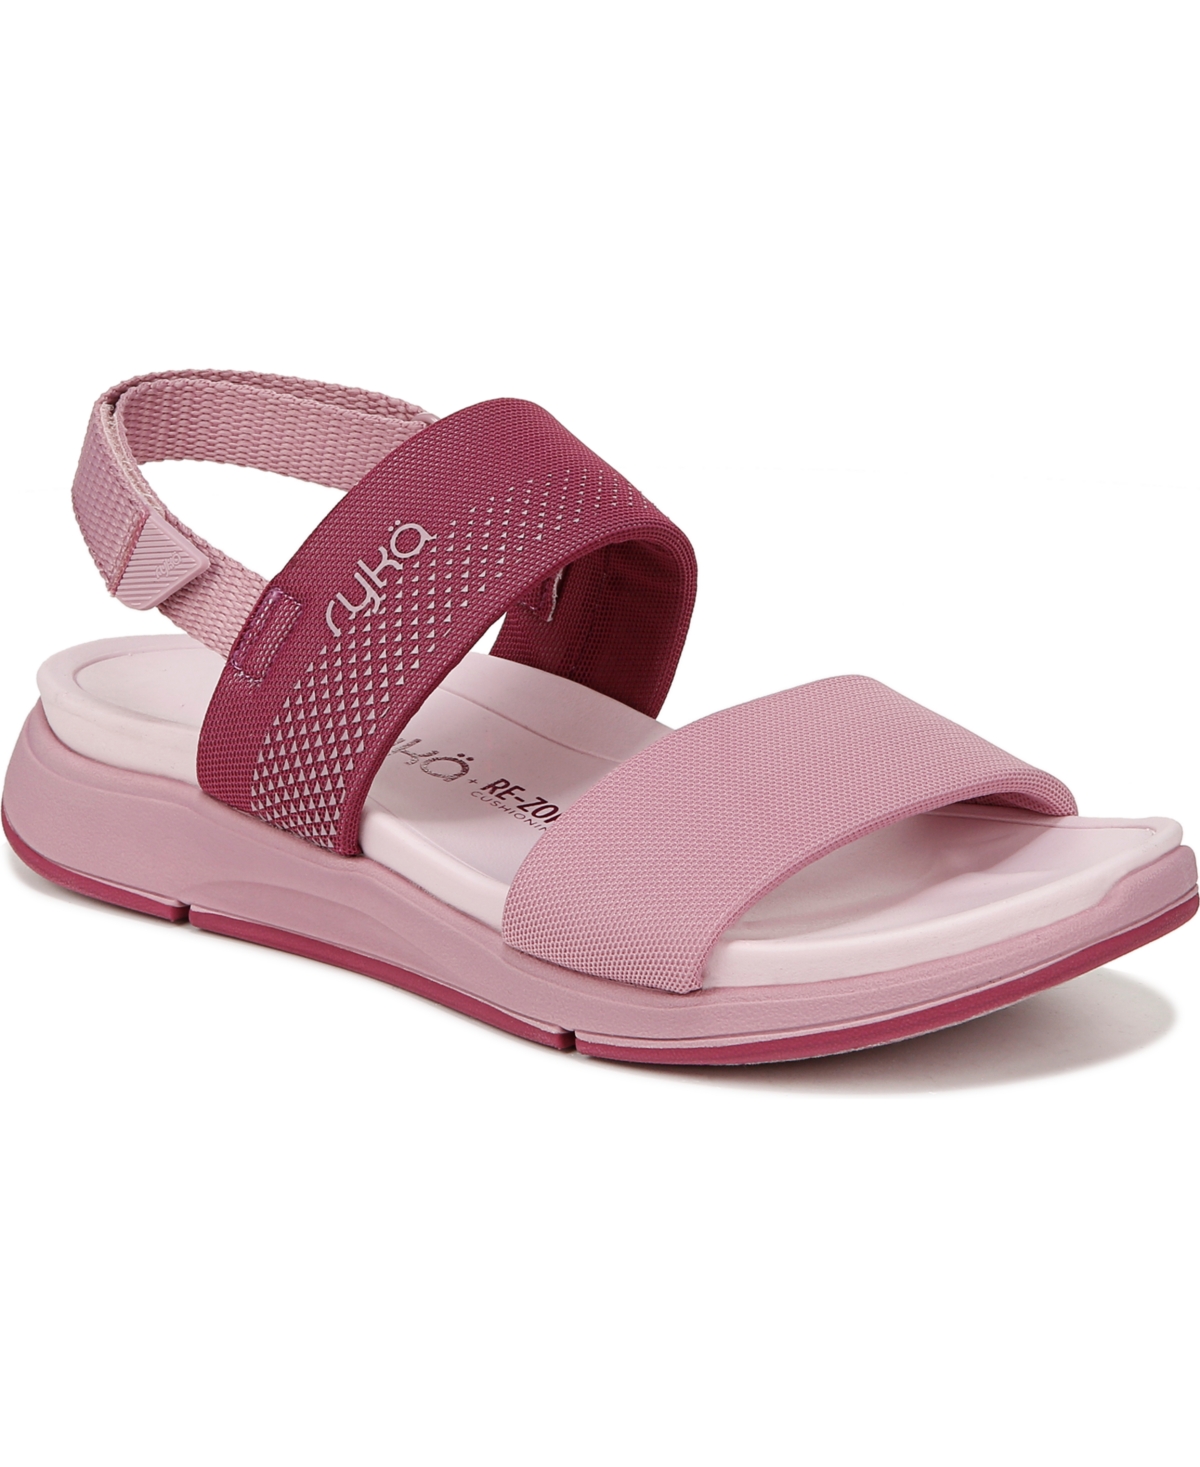 Women's Take Charge Slingback Sandals - Deep Pink Fabric